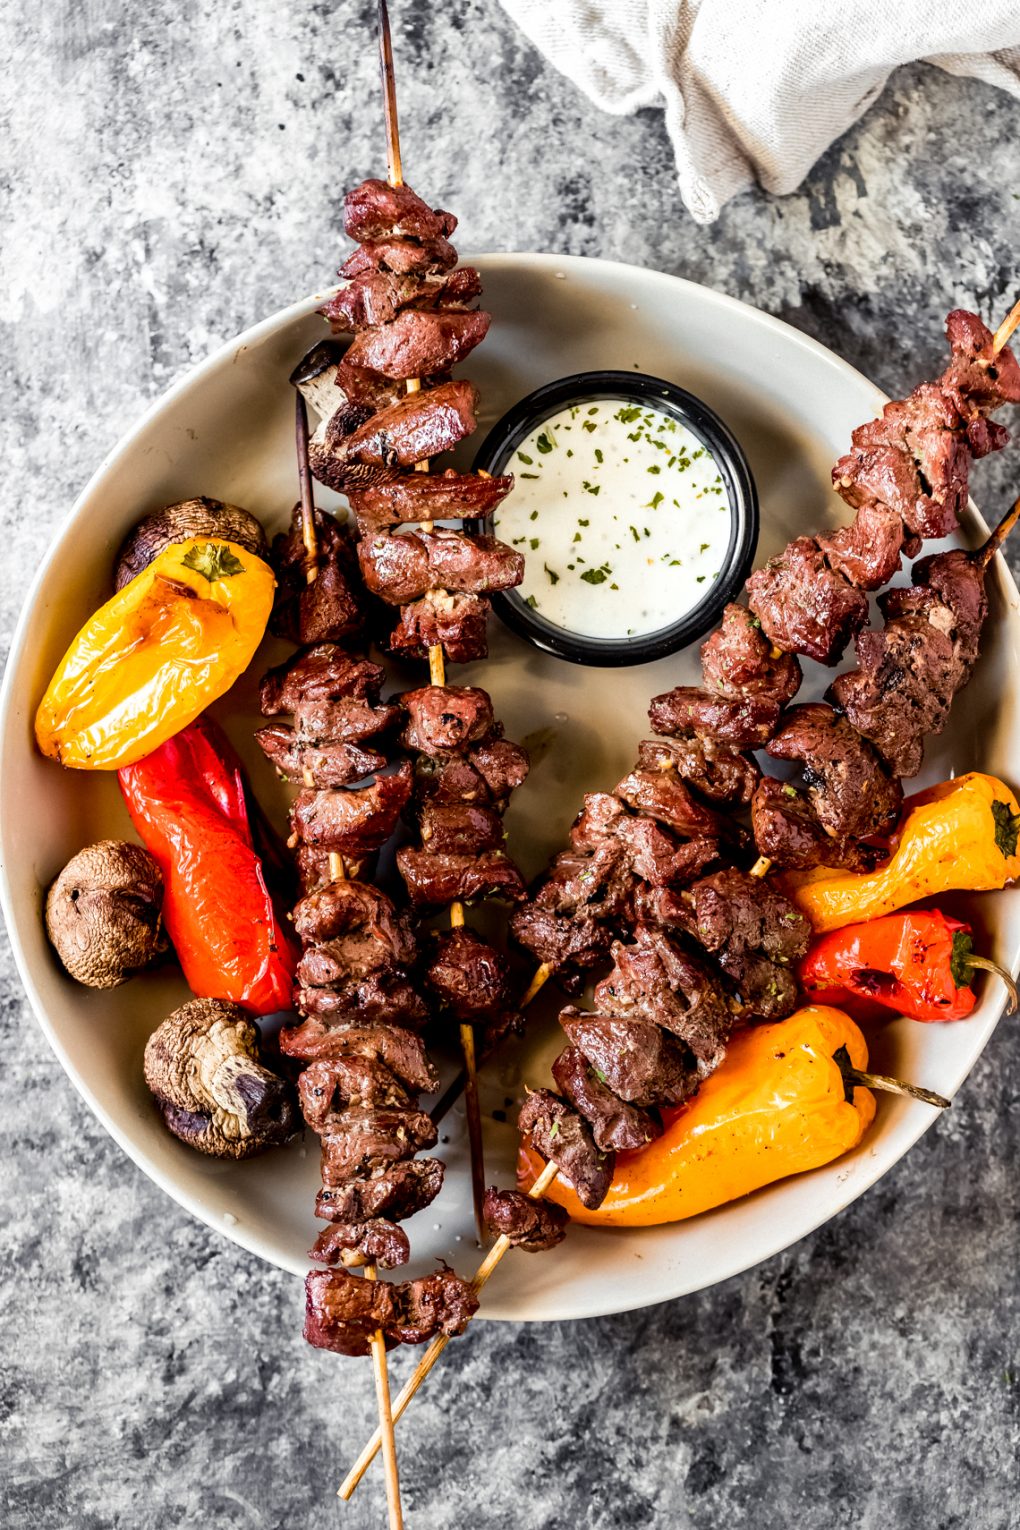 skewers of grilled venison kabobs and vegetables in a bowl